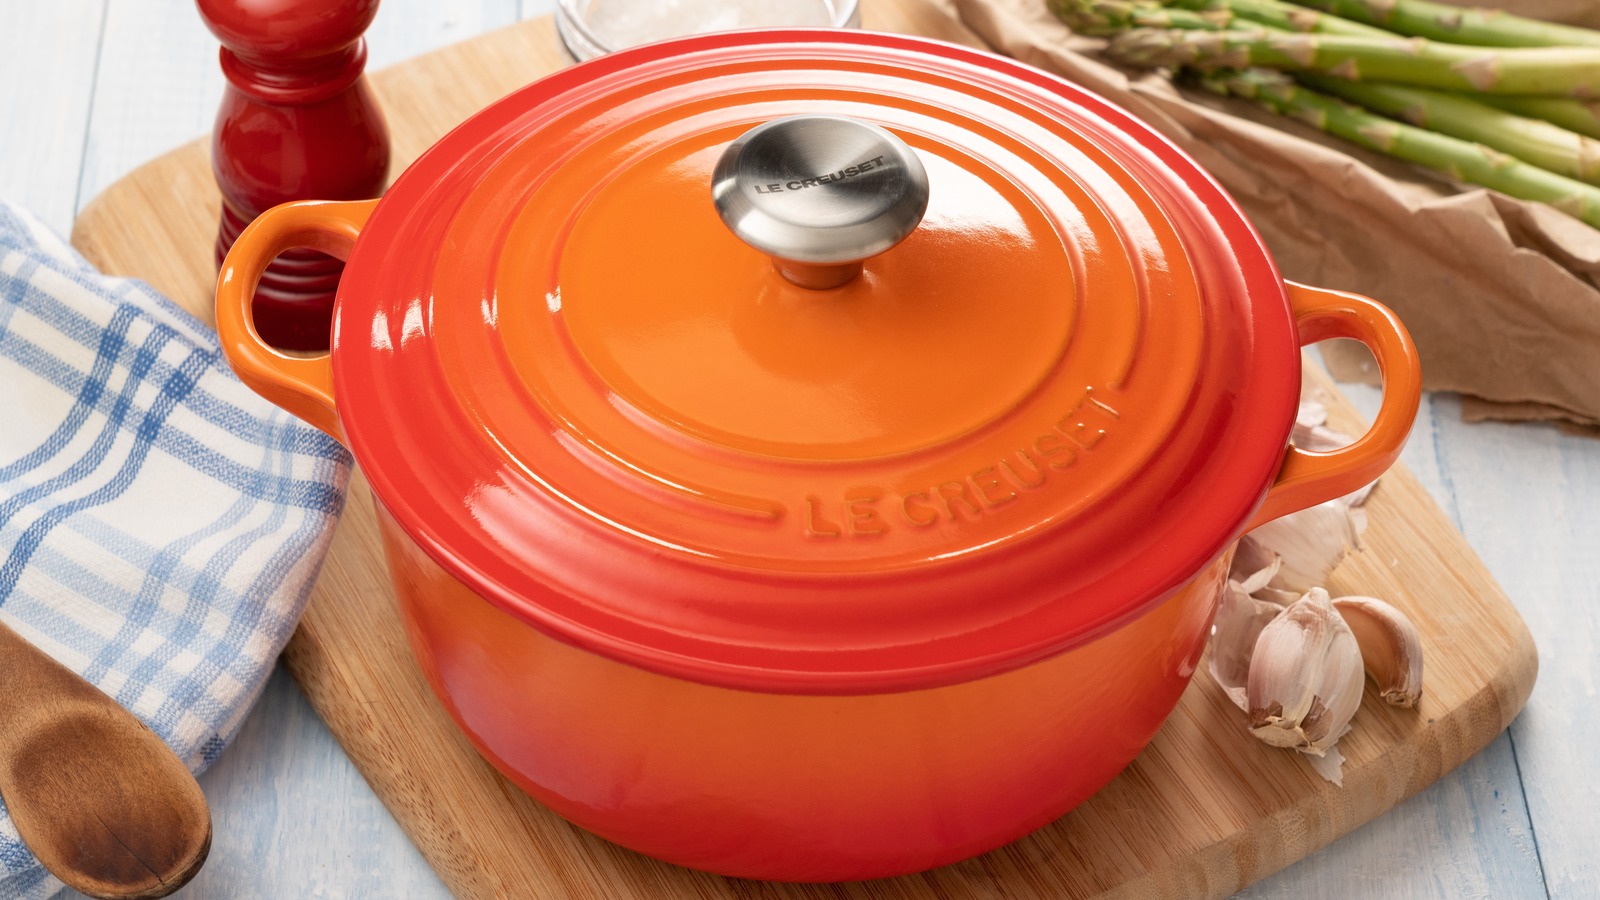 https://www.tastingtable.com/img/gallery/should-you-use-a-dutch-oven-with-chipped-enamel/l-intro-1684165722.jpg